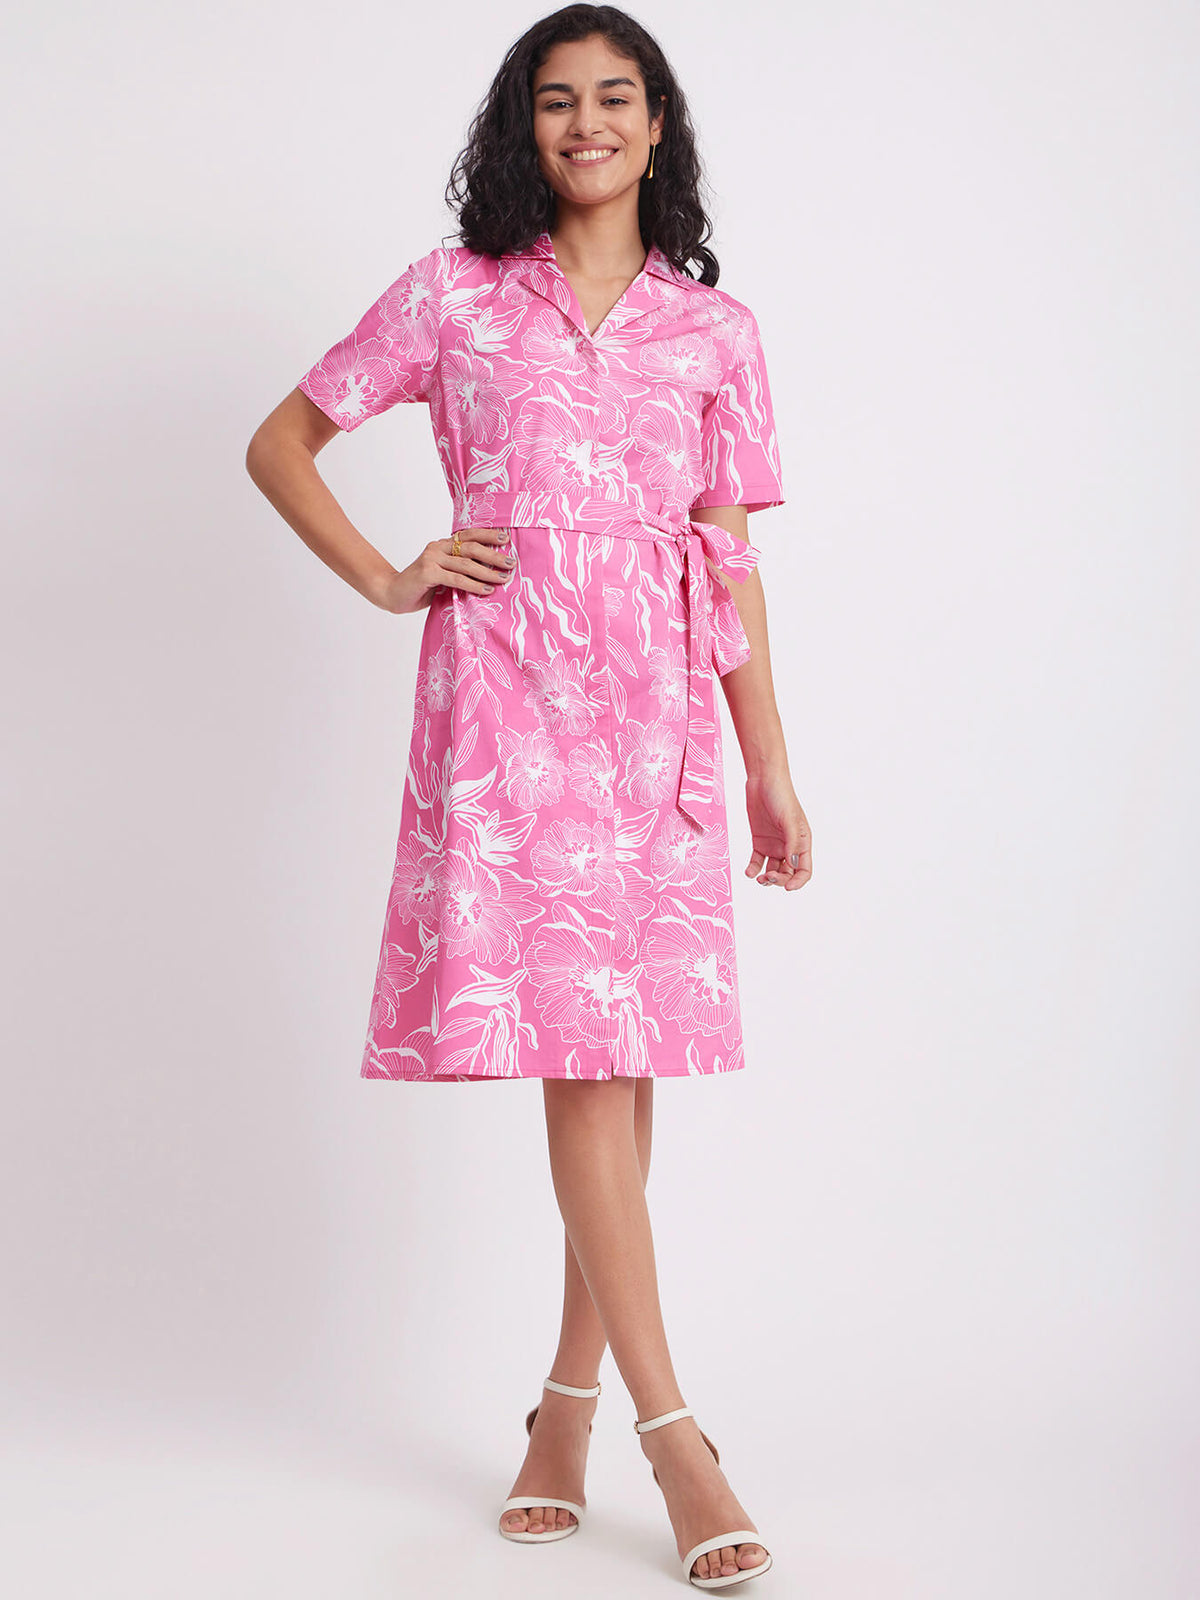 Cotton Satin Floral Dress - Pink And White